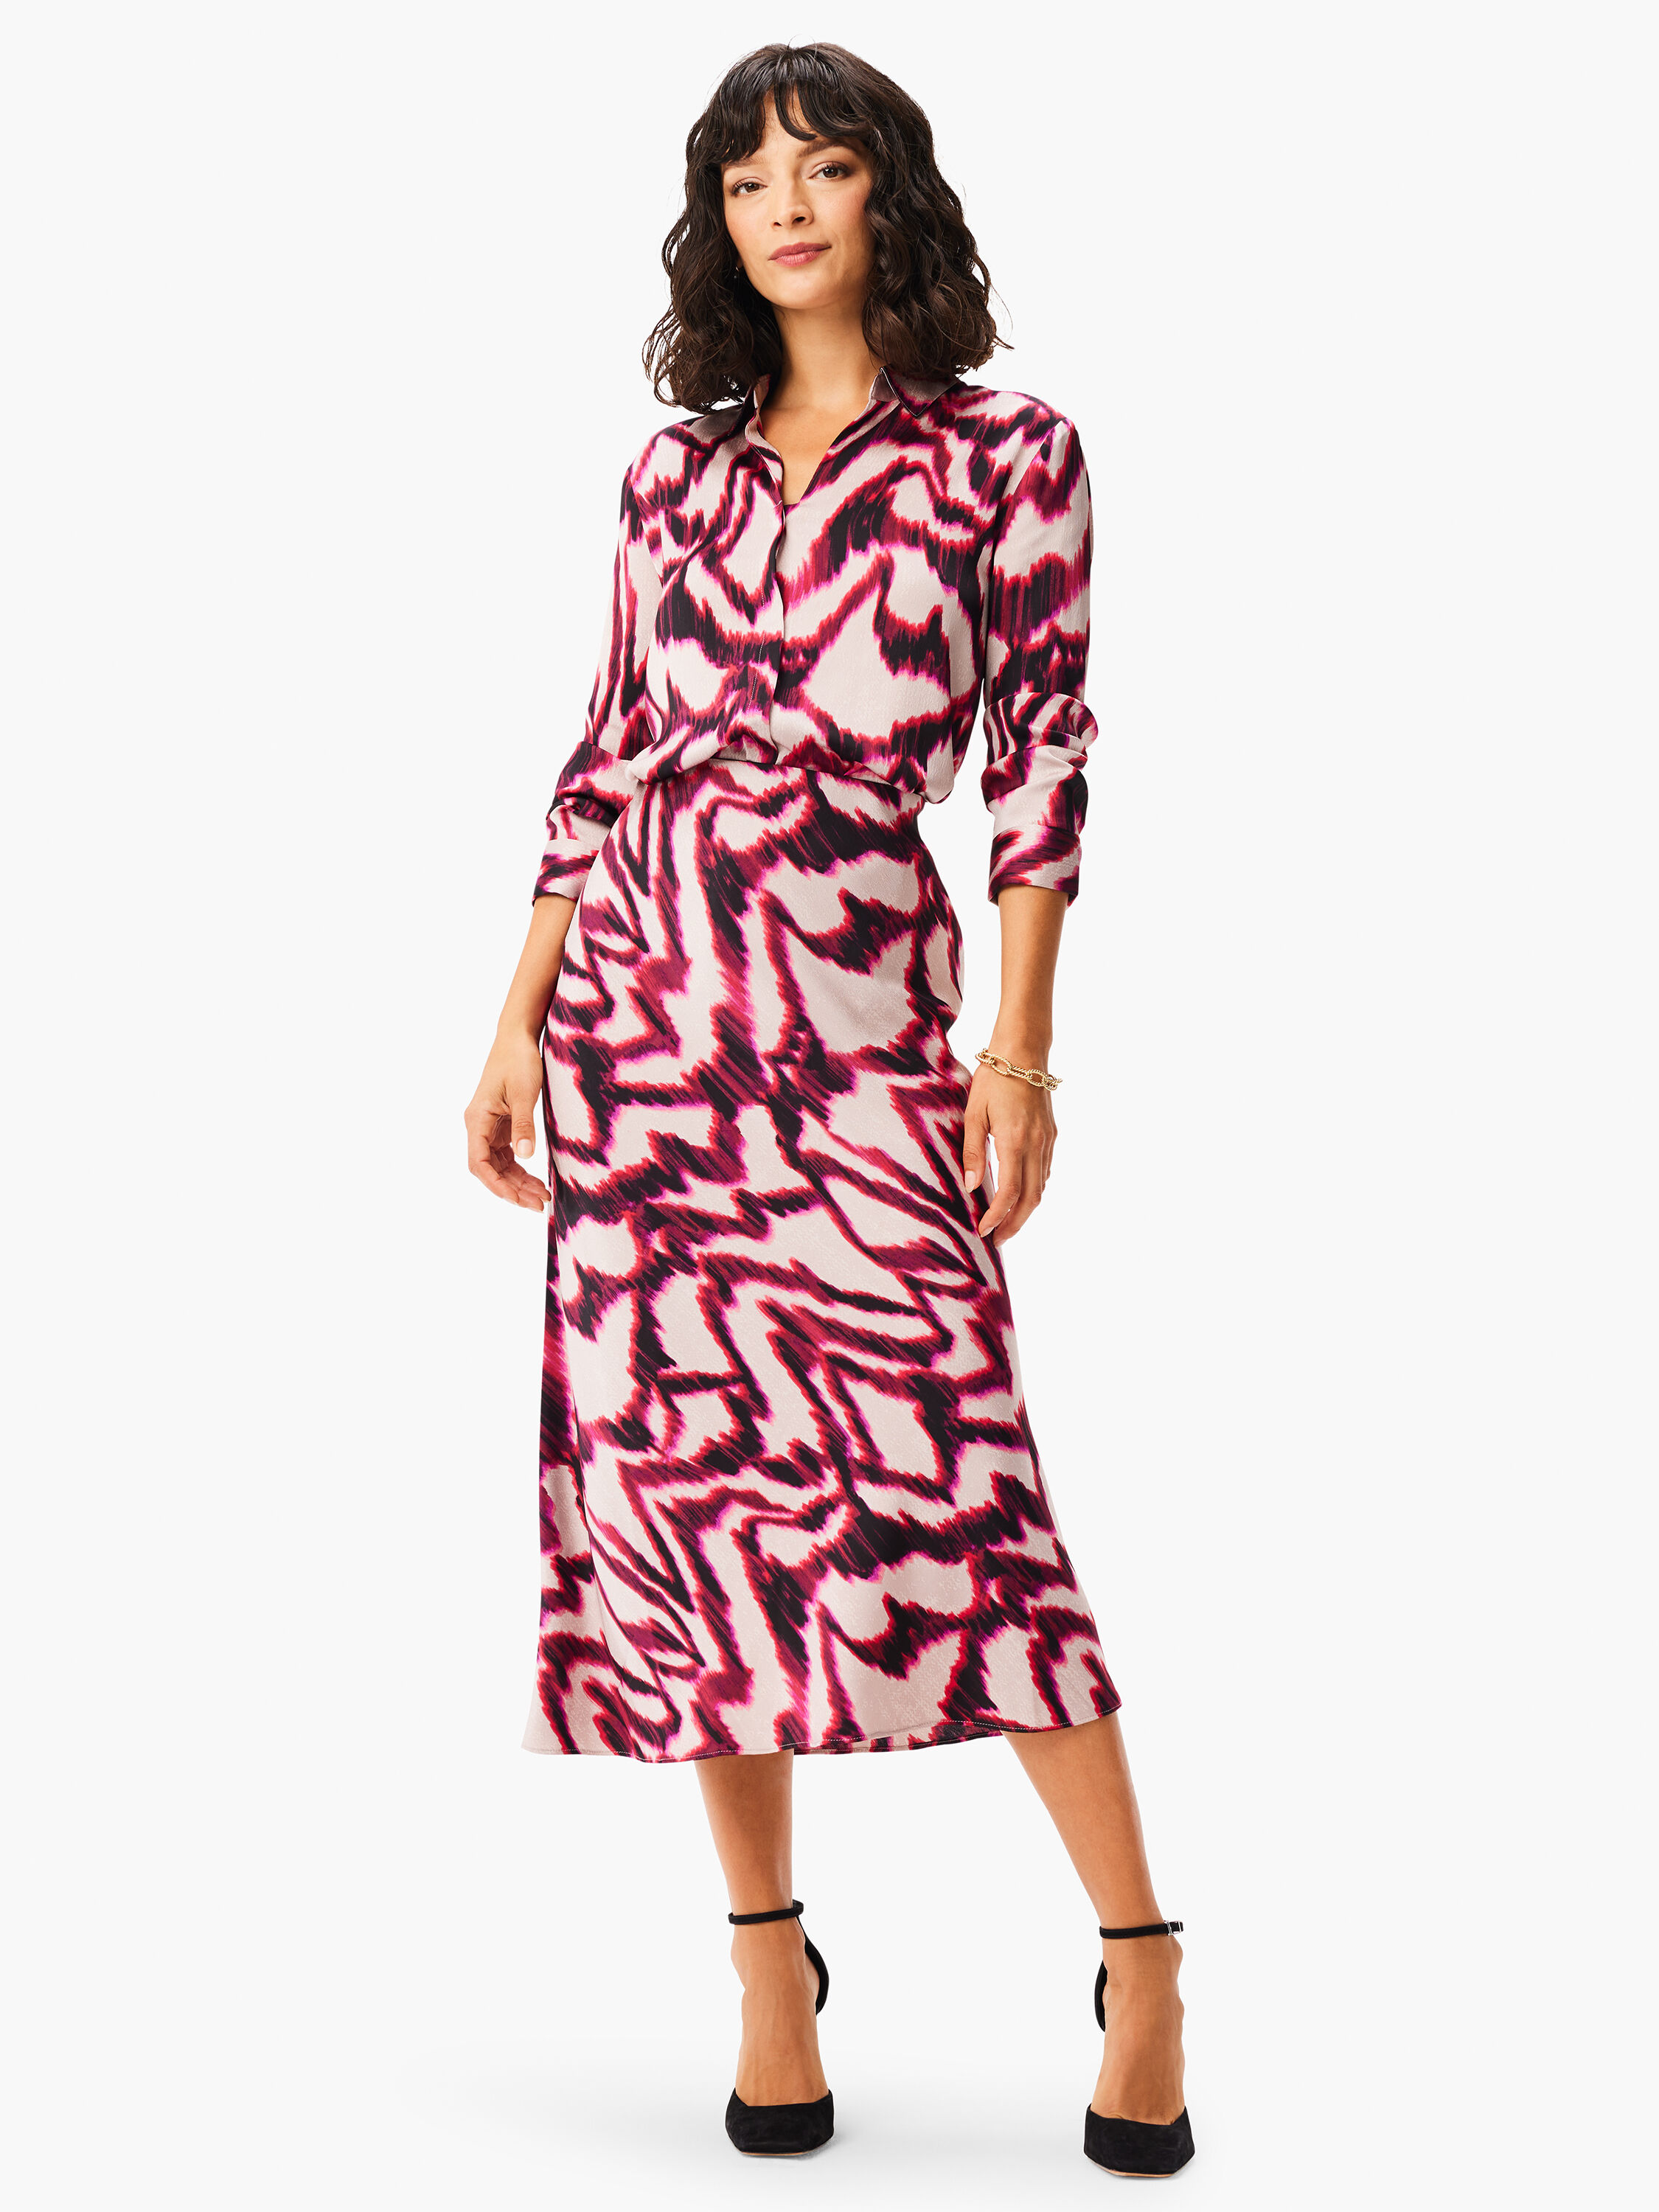 Dresses + Skirts for Women | Casual, Work + Special Occasion